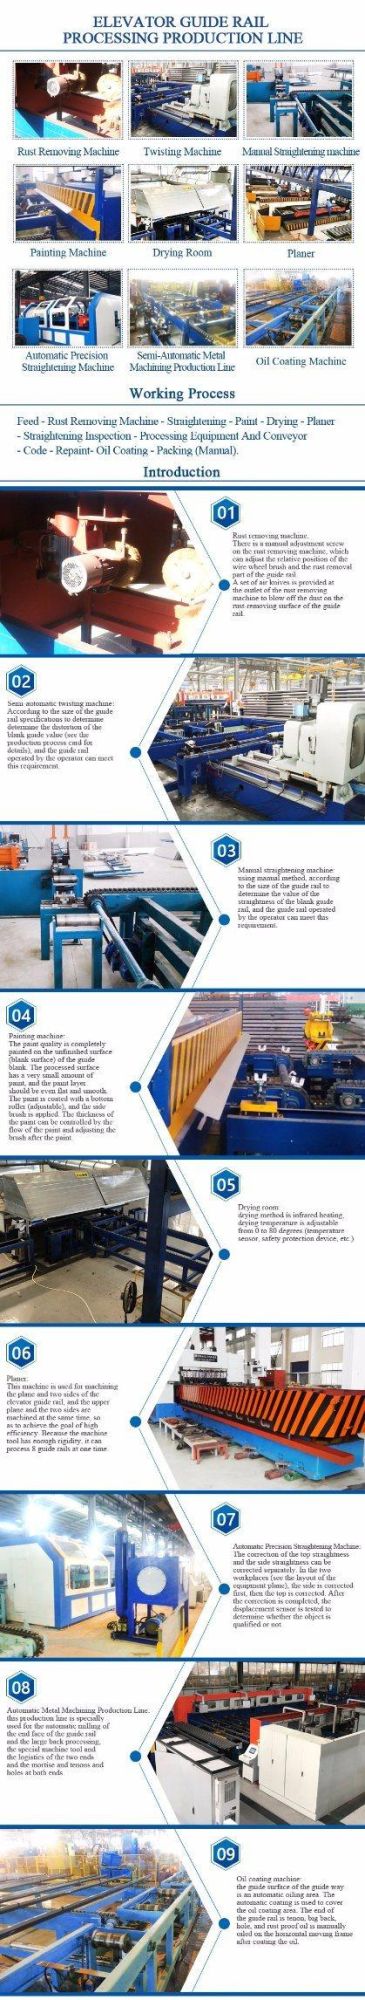 High Reputation Drywall Production Line T Shaped Elevator Lift Guide Rail Roll Forming Machine